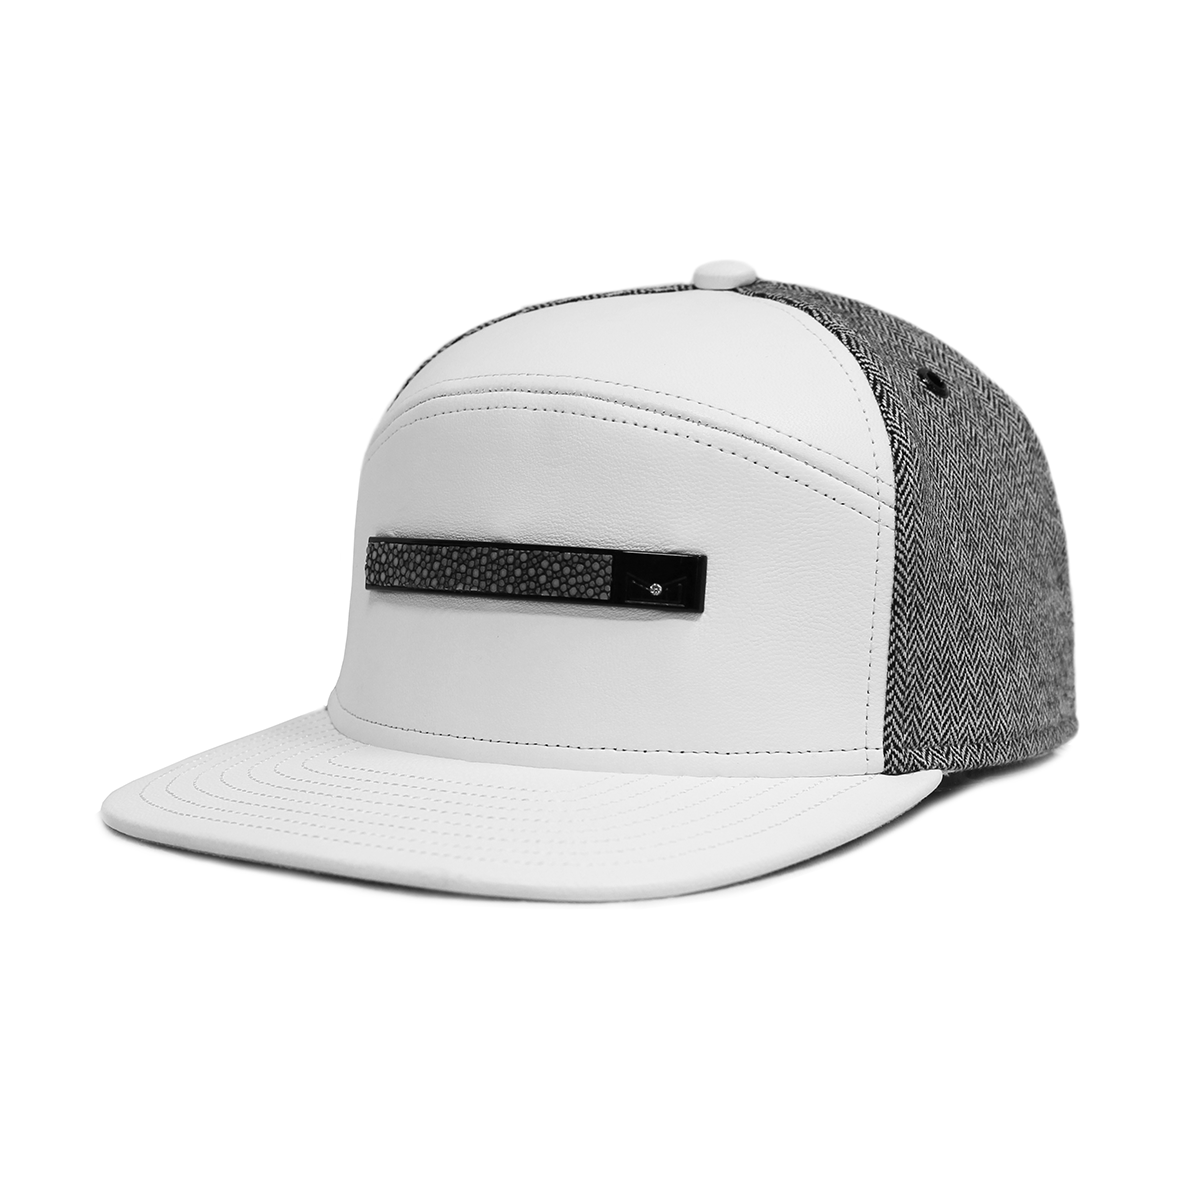 Melin Bar Stinger - Limited Hat for $1,200 - only 30 hats made worldwide